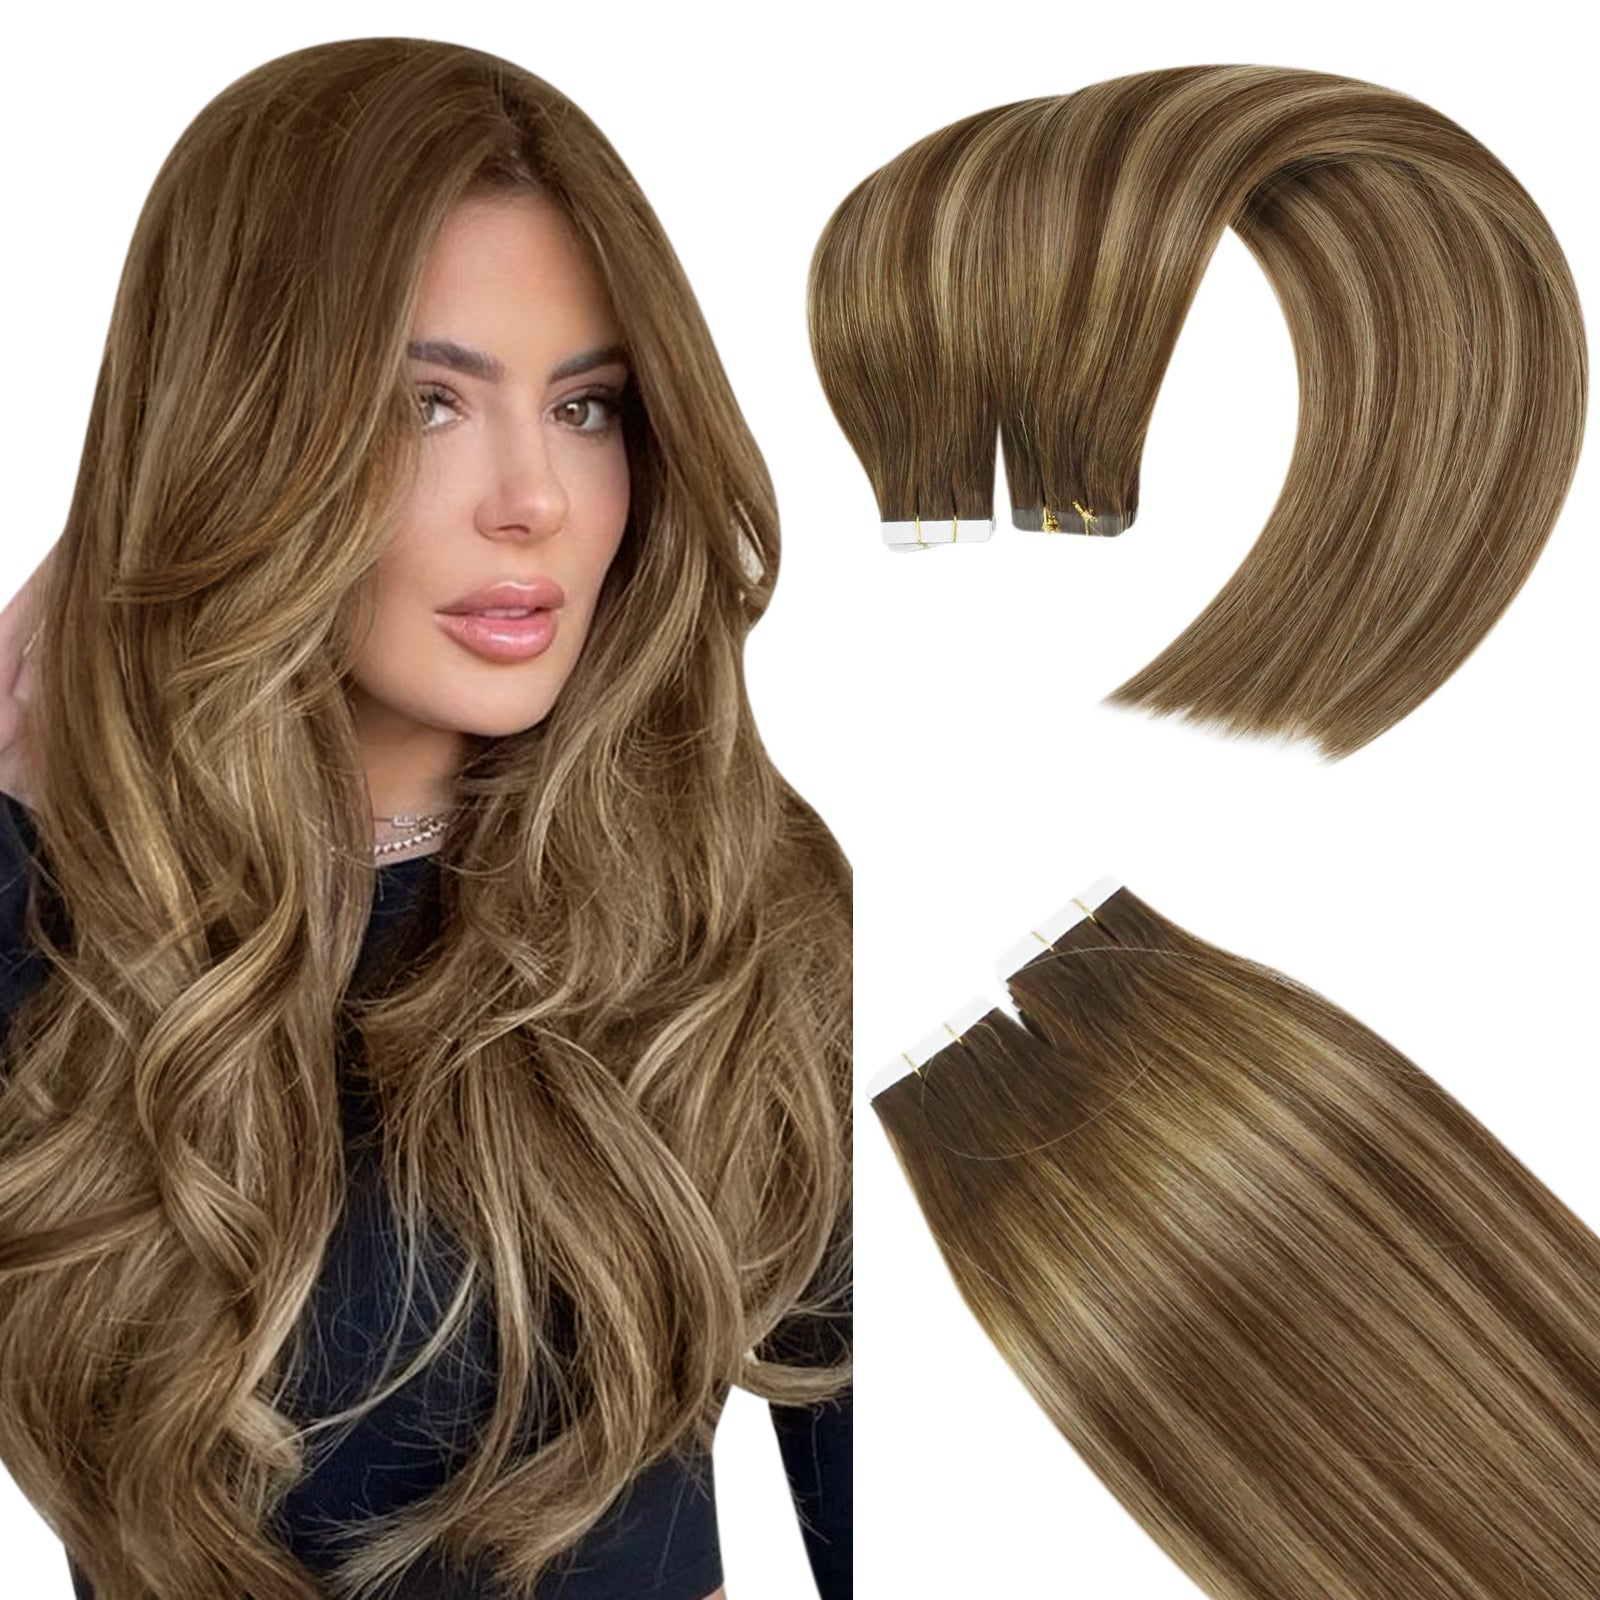 tape in hair extensions,best hair extensions,tape ins,tape in hair extensions,balayage brown hair extensions,tape ins,